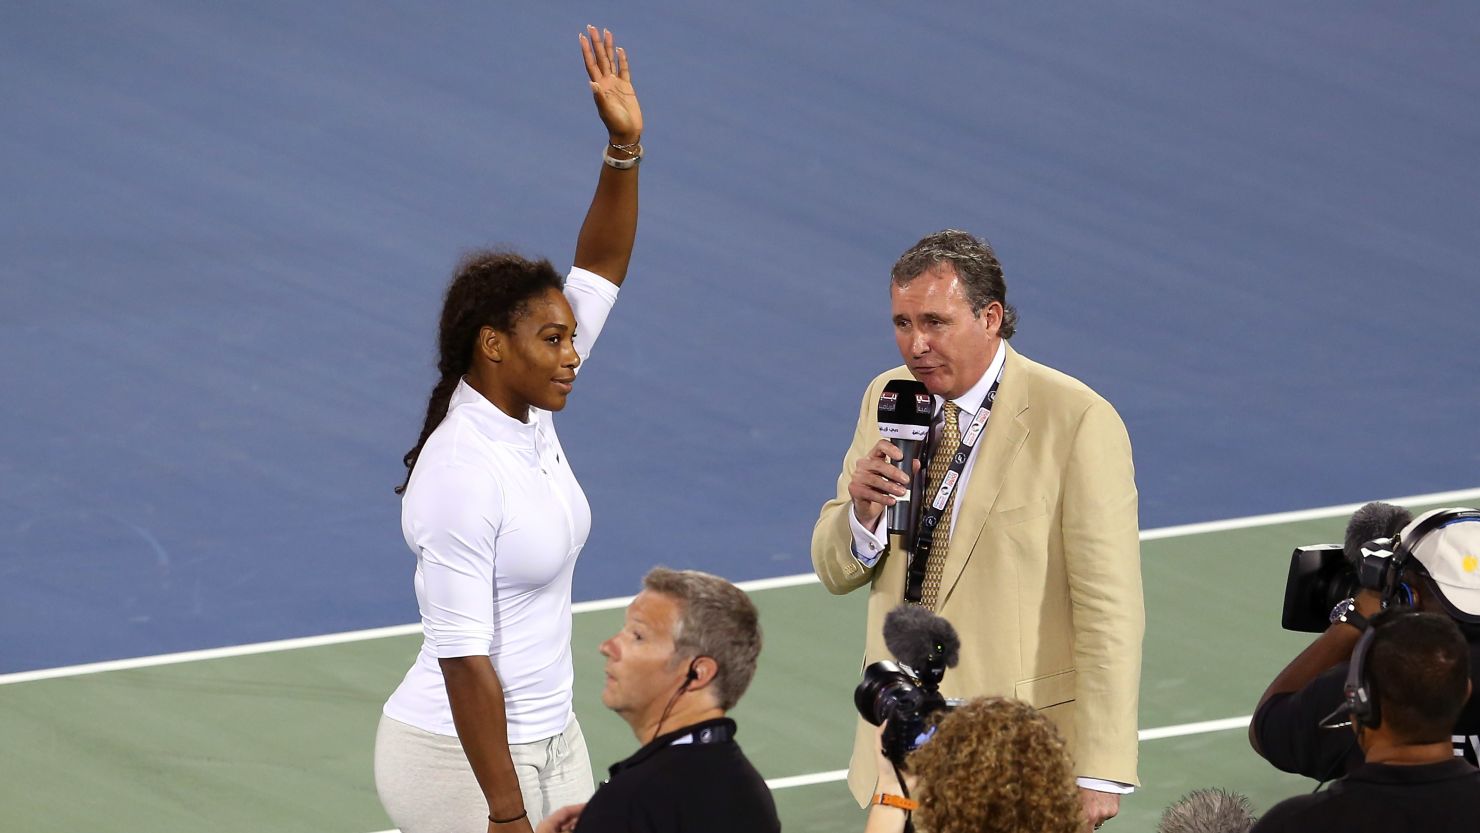 Serena Williams delivers an on court interview as she withdraws from her match on the third day of the Dubai event. 